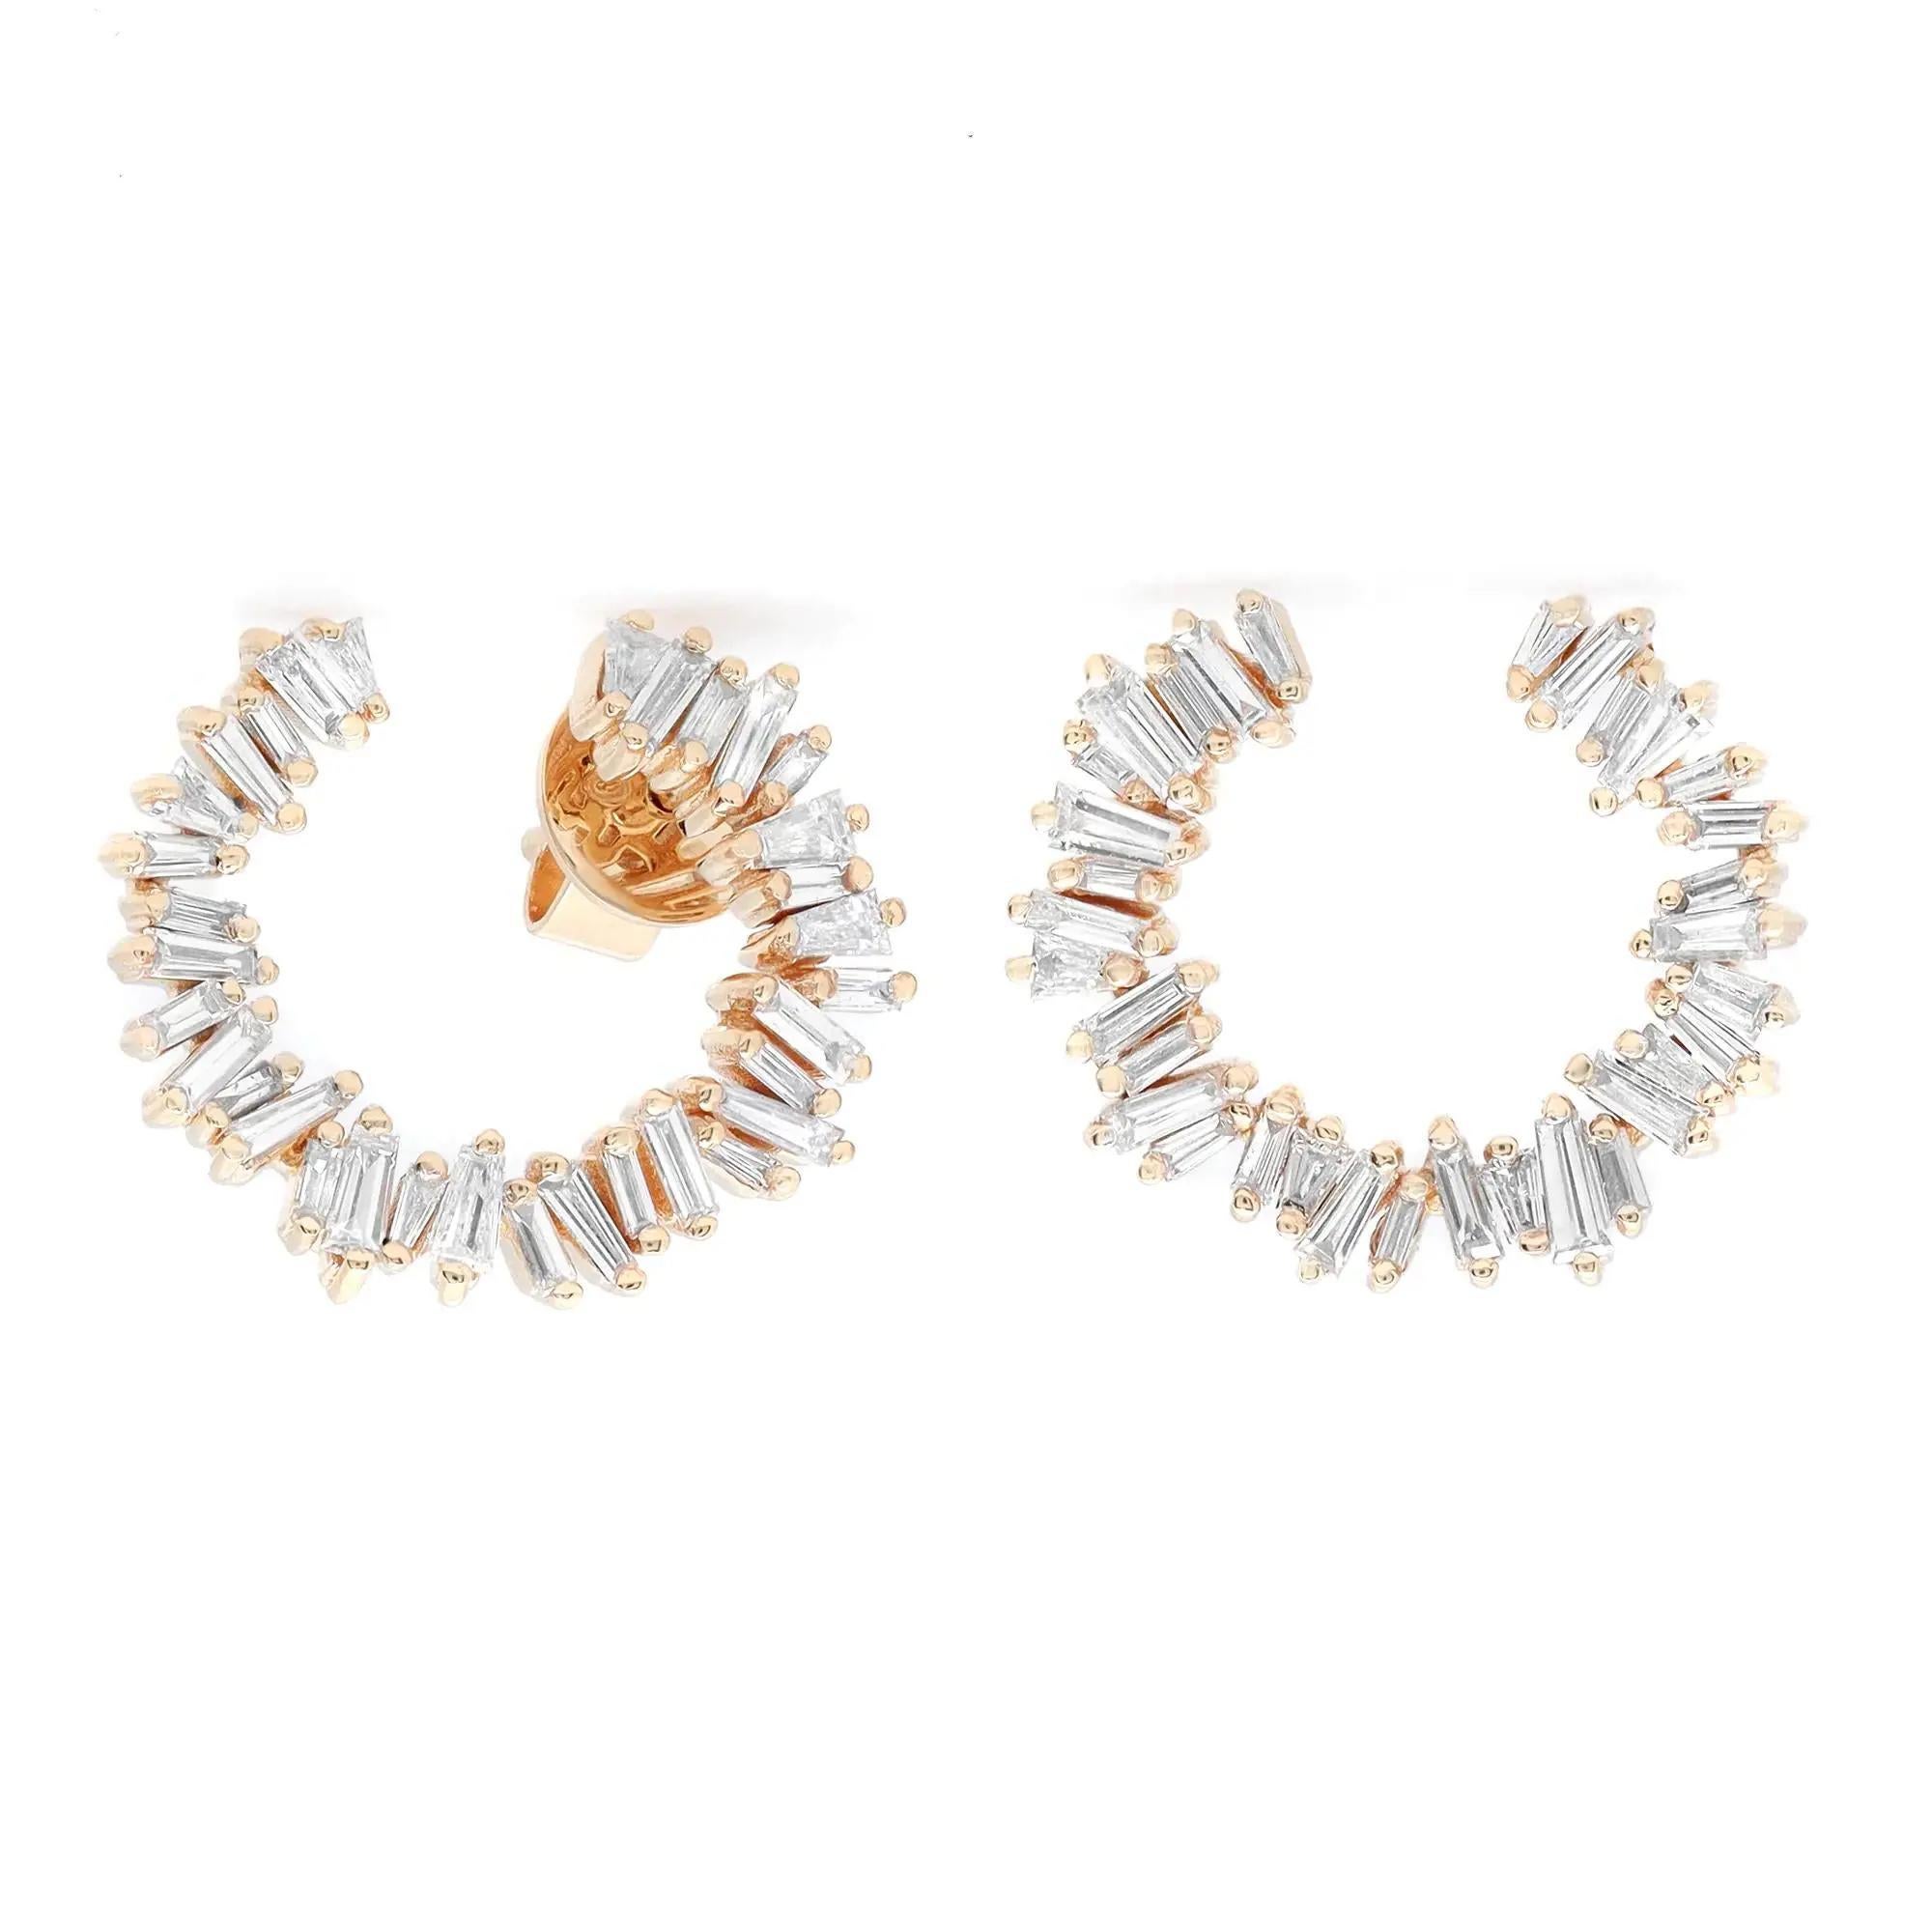 Elevate your attire with these dazzling diamond stud earrings. Crafted in fine 18K yellow gold. These earrings feature prong set baguette cut diamonds set in a C-shaped shank. Total diamond weight: 0.94 carat. Diamond quality: color G-H and clarity